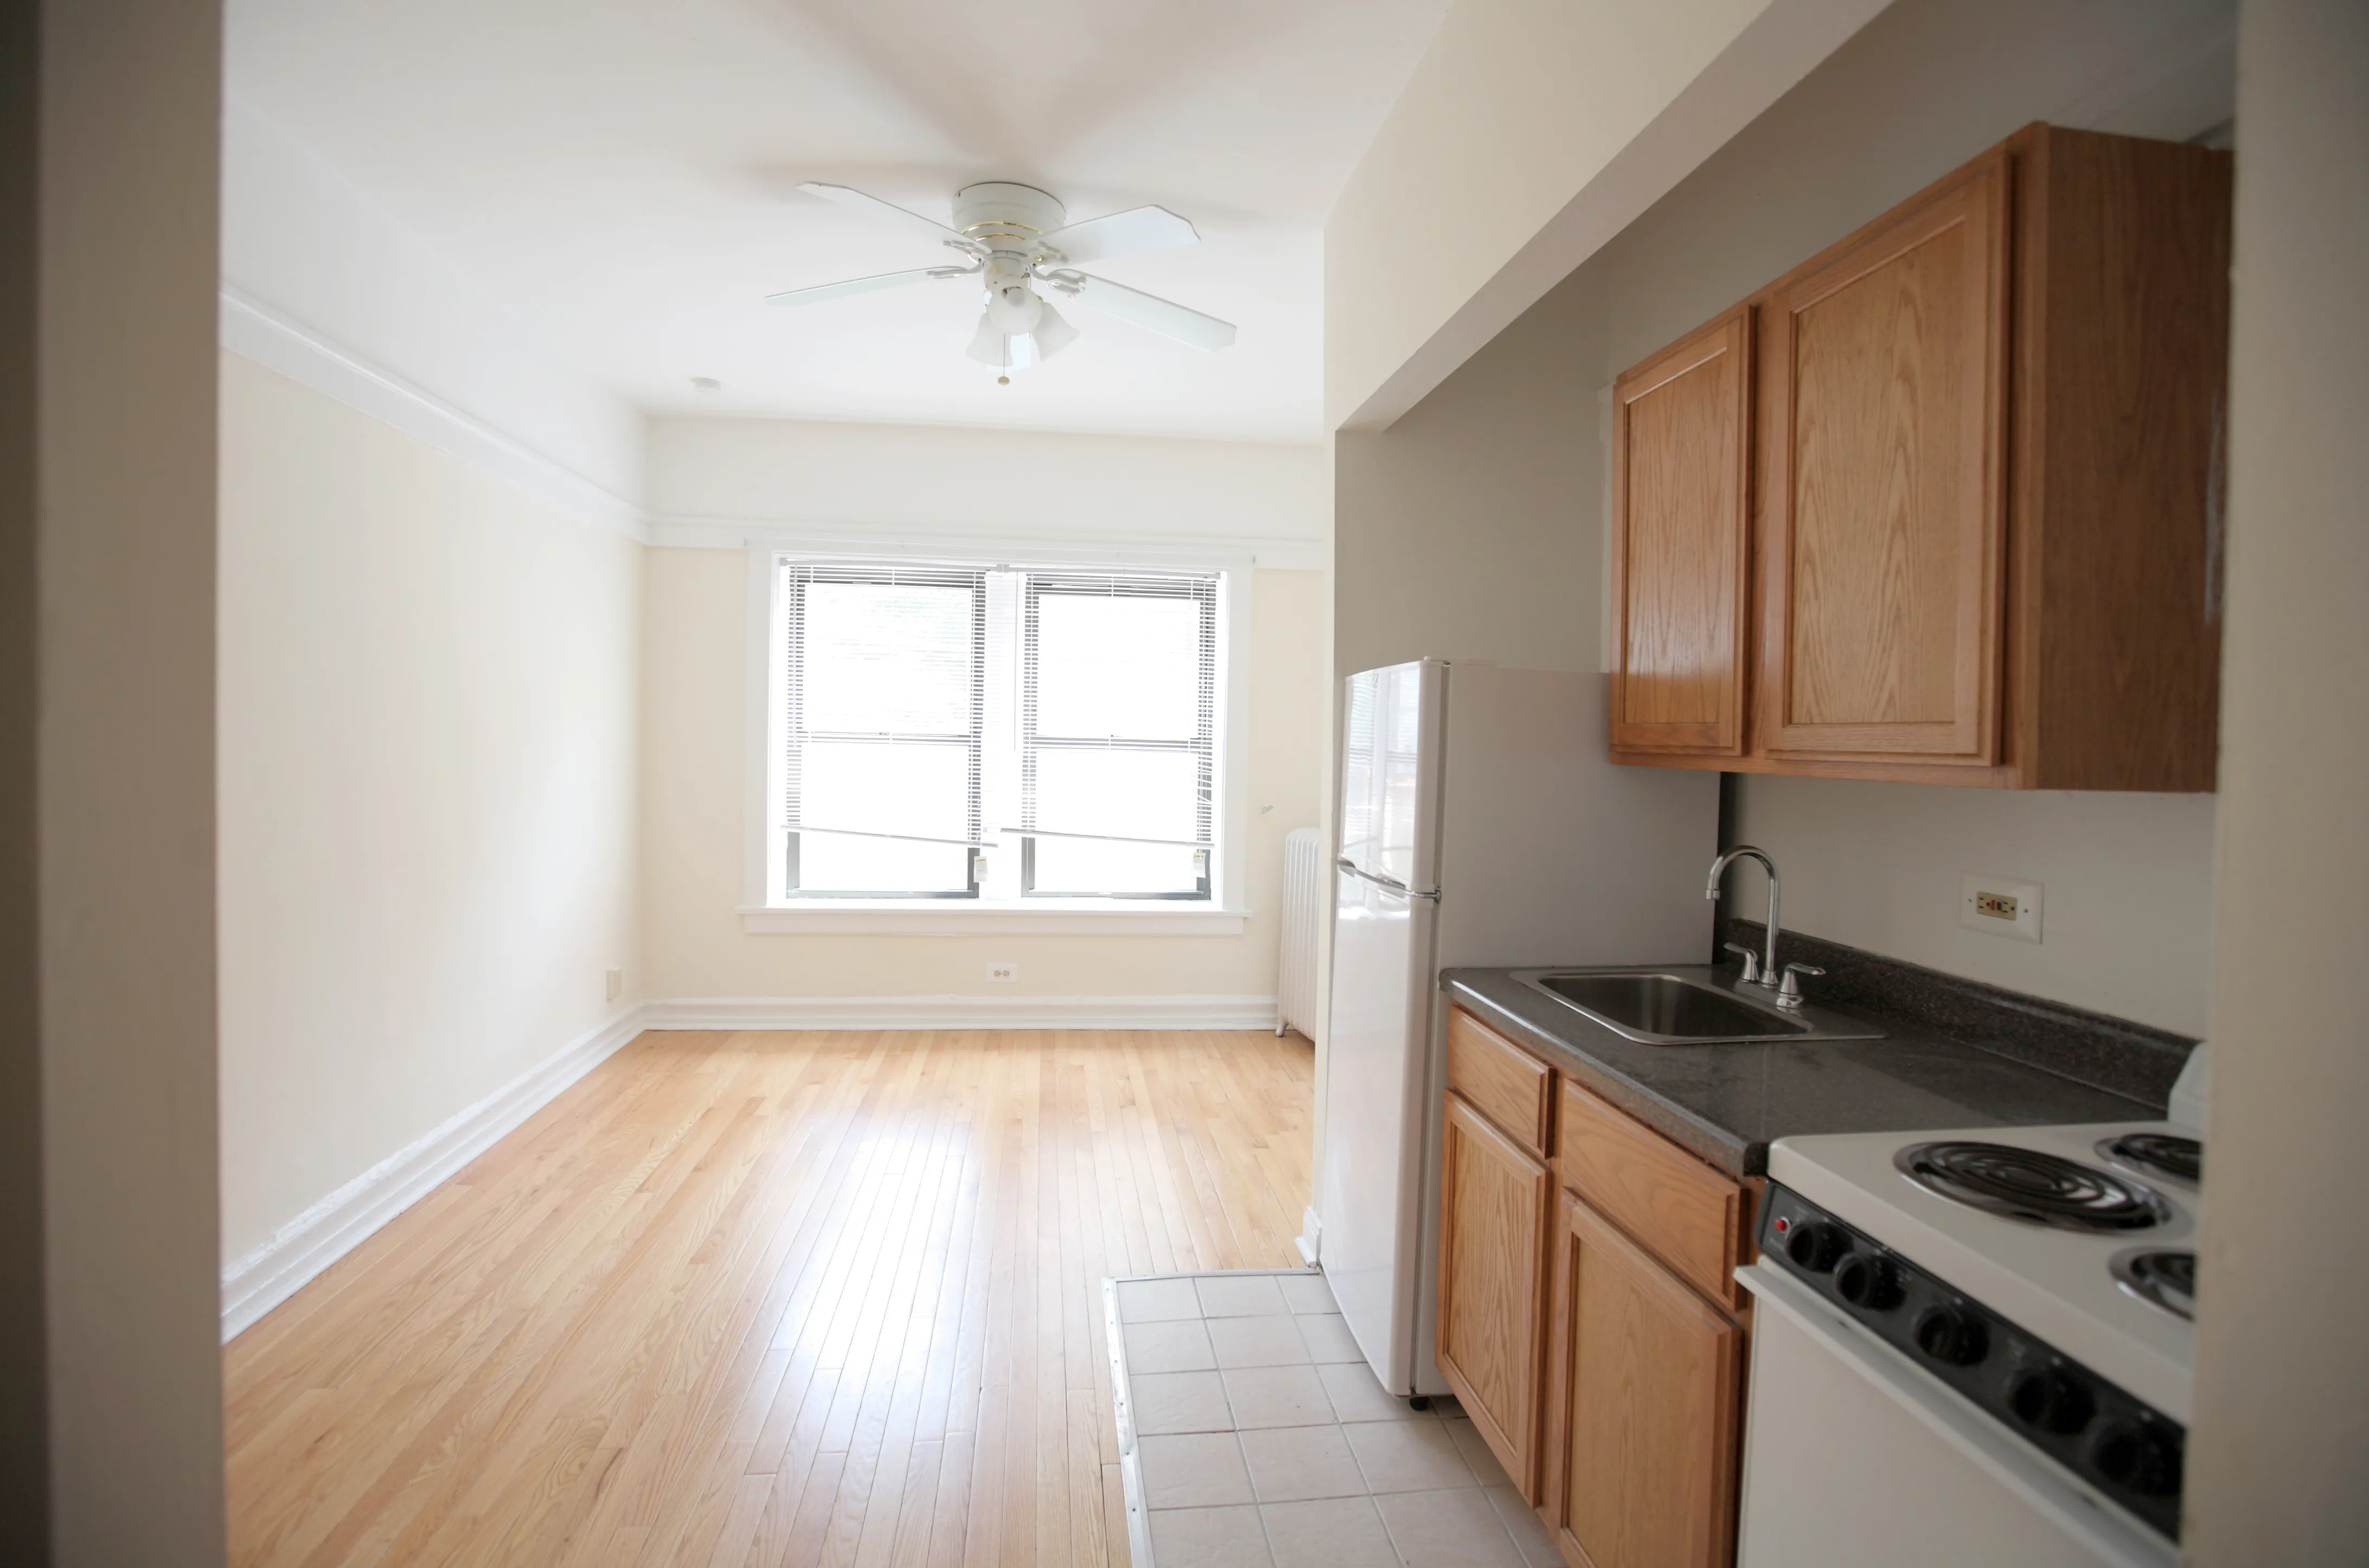 7455 N GREENVIEW AVE 60626-The Highlands-unit#0412-Chicago-IL